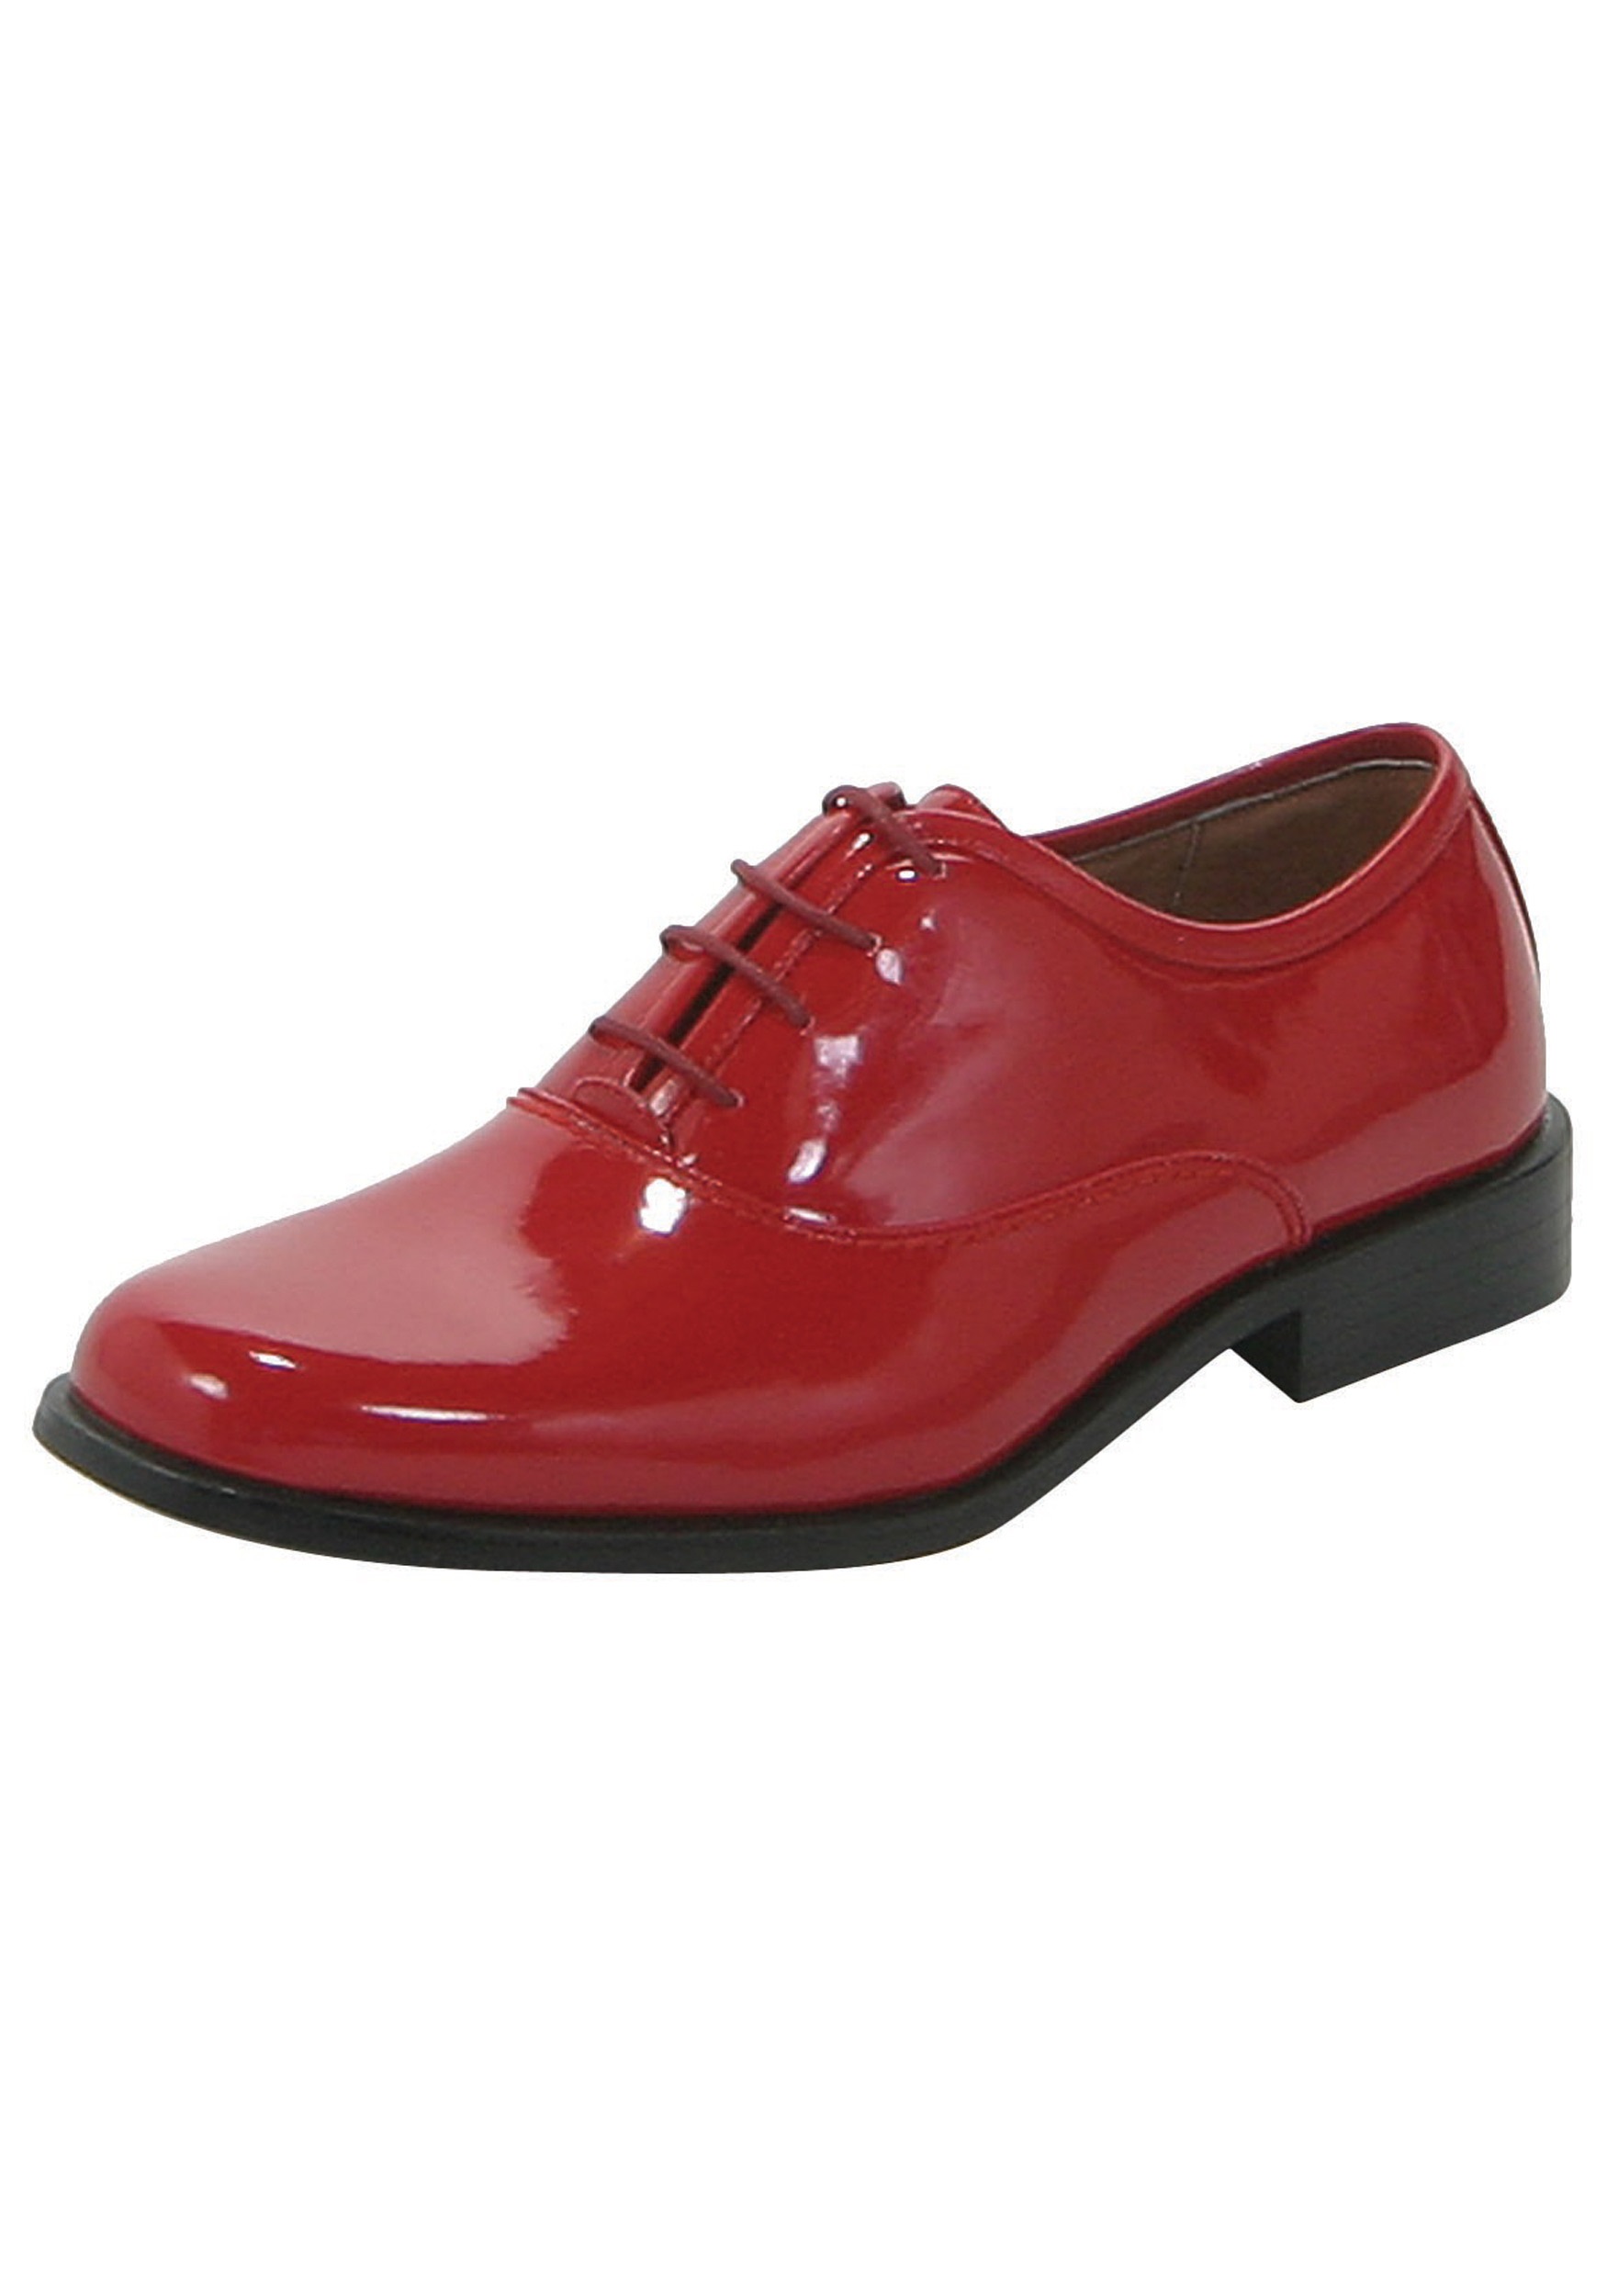 Red Dress Shoes - Men's Deluxe Prom Shoes